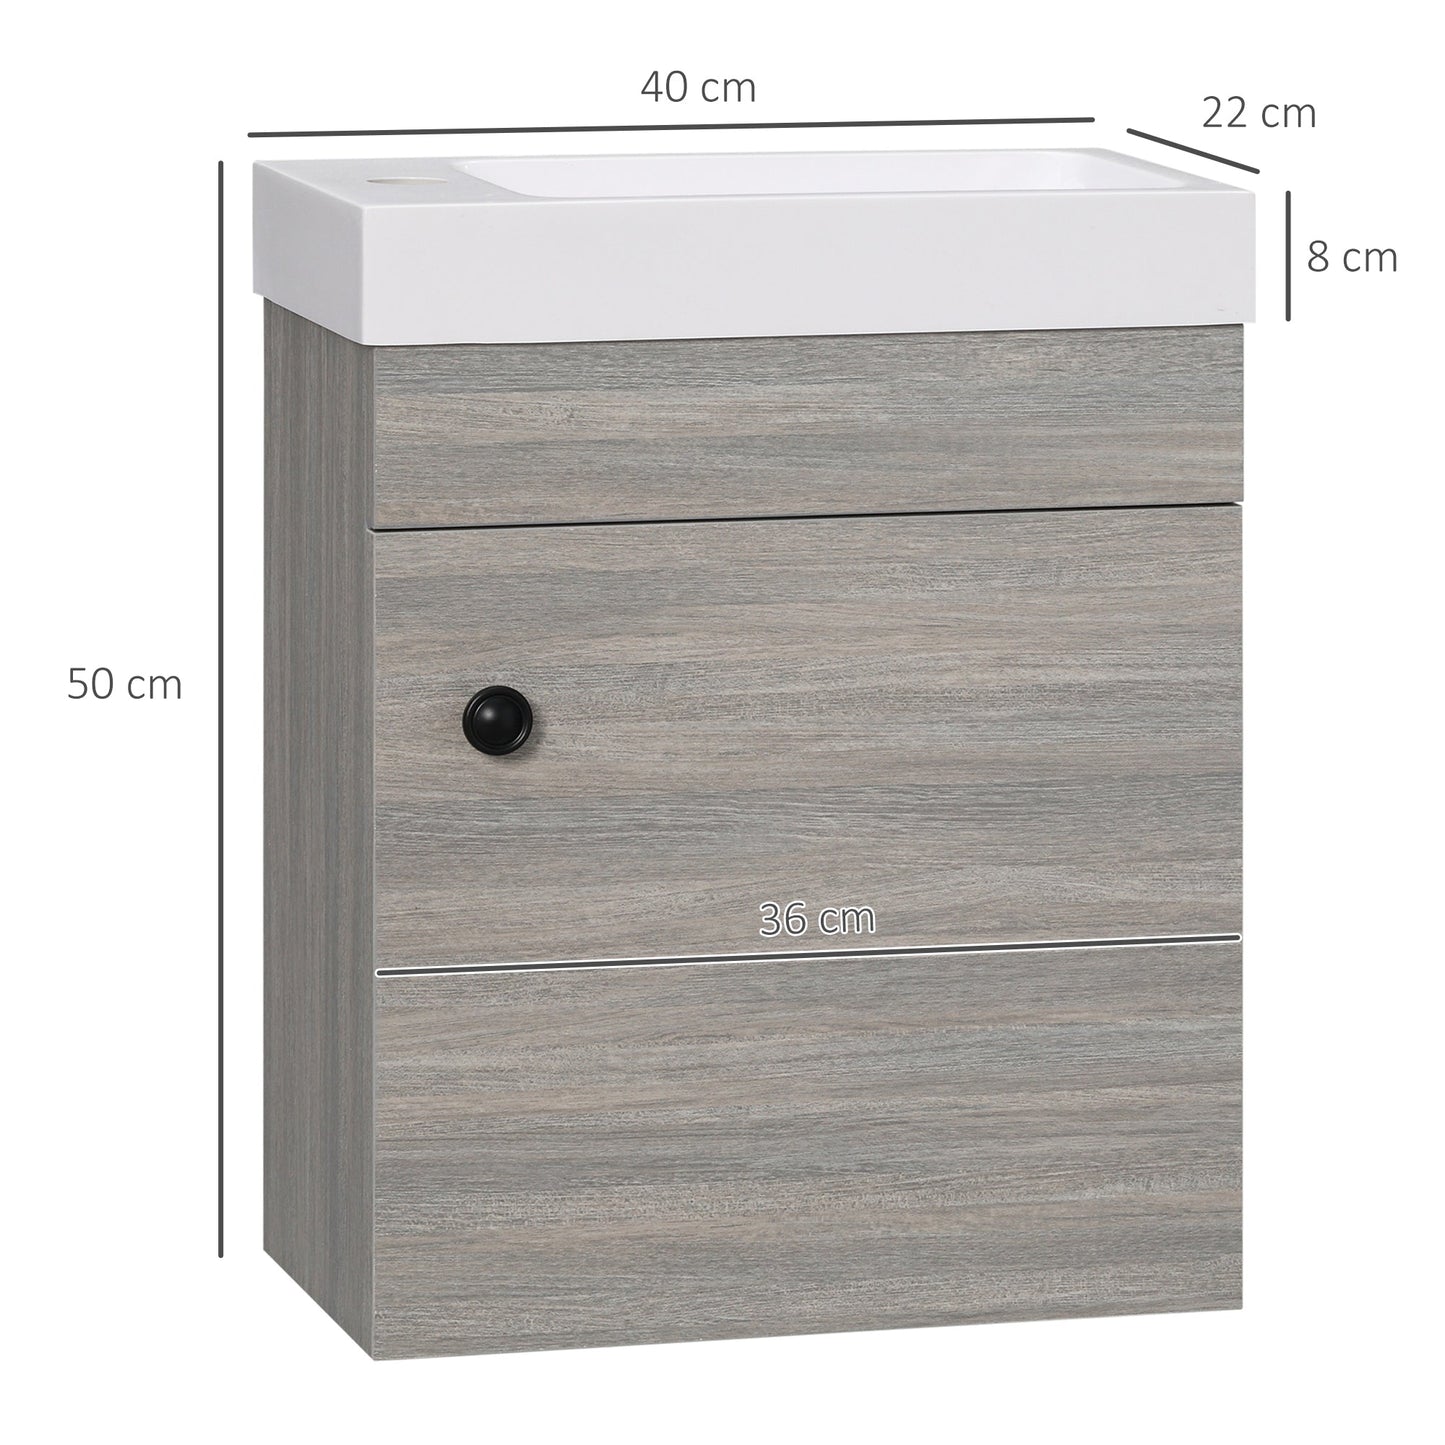 kleankin Bathroom Vanity Unit with Basin, Wall Mounted Bathroom Wash Stand with Sink, Tap Hole and Storage Cabinet, Grey